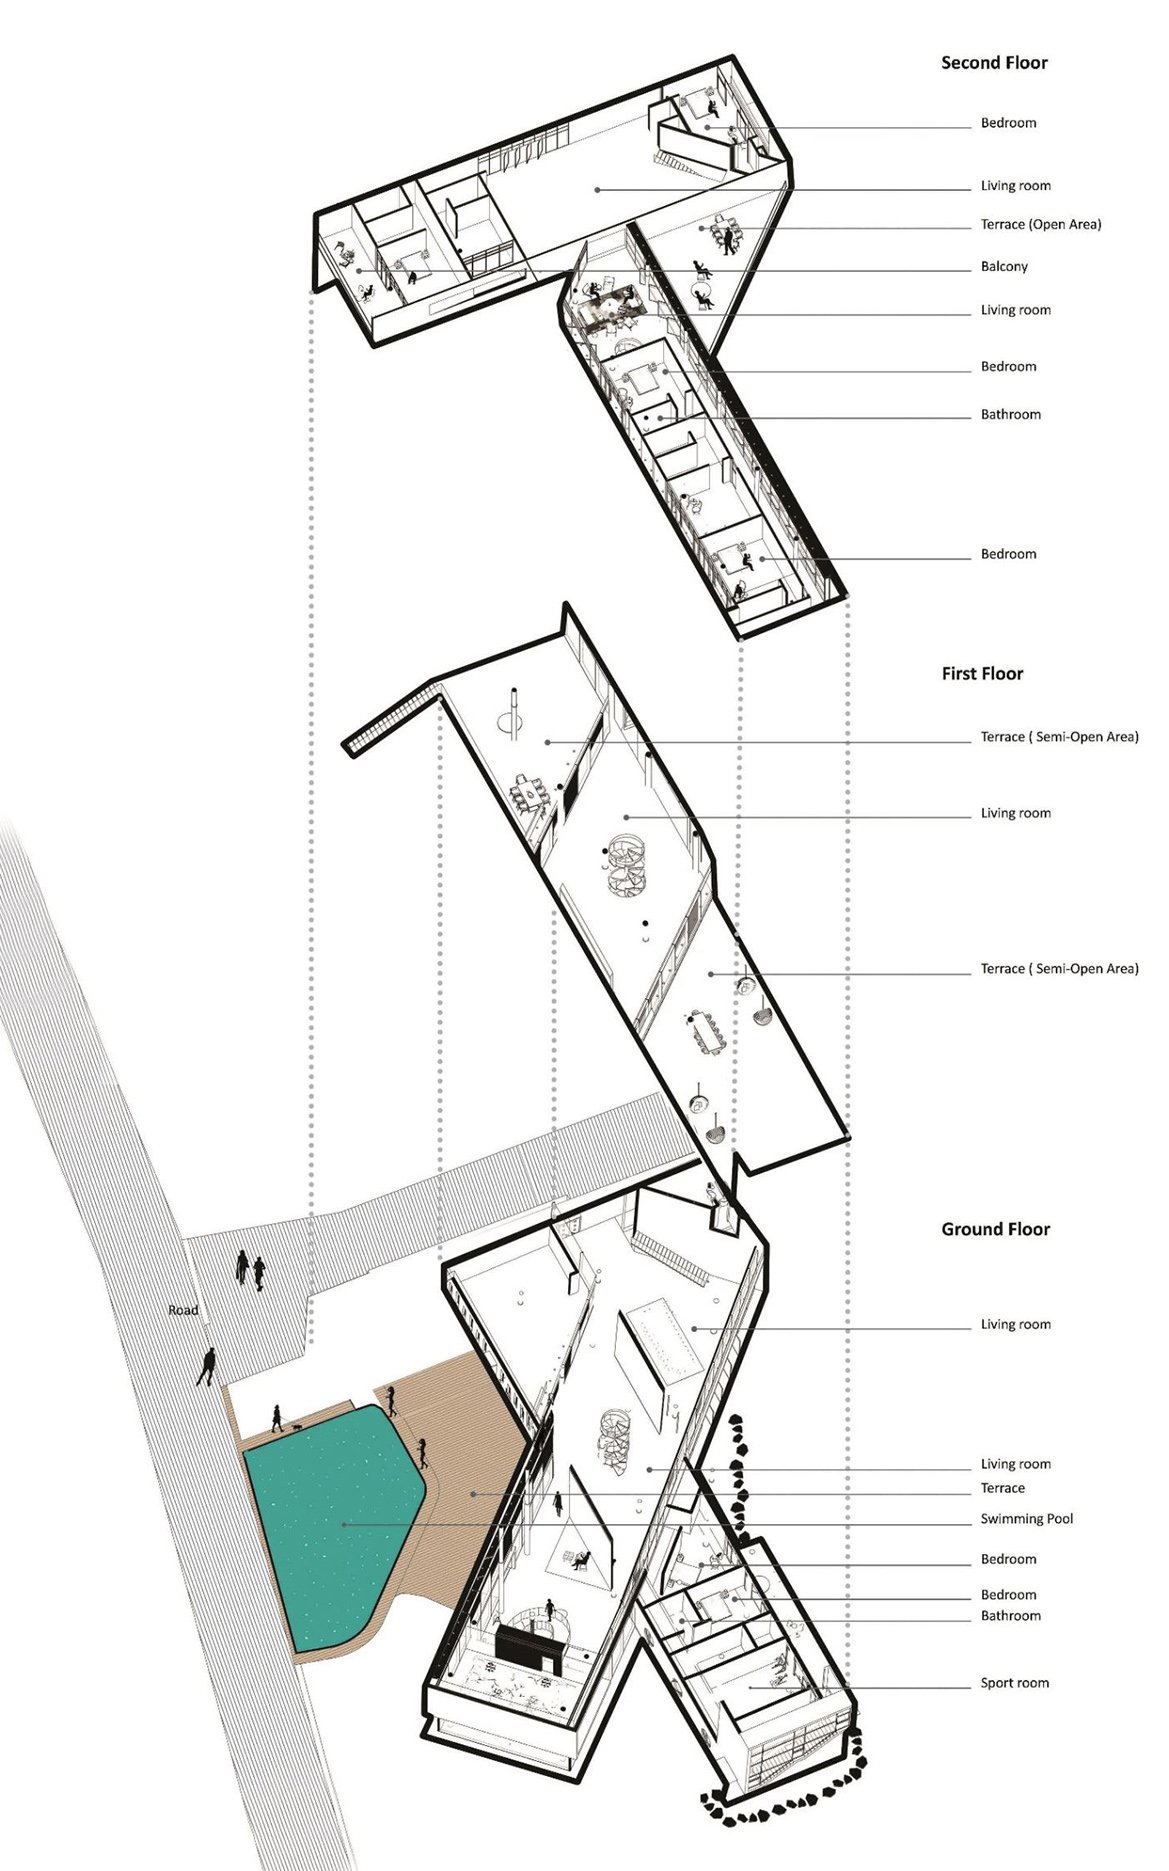 Exploded Plan Perspective Diagram | Wall Corporation